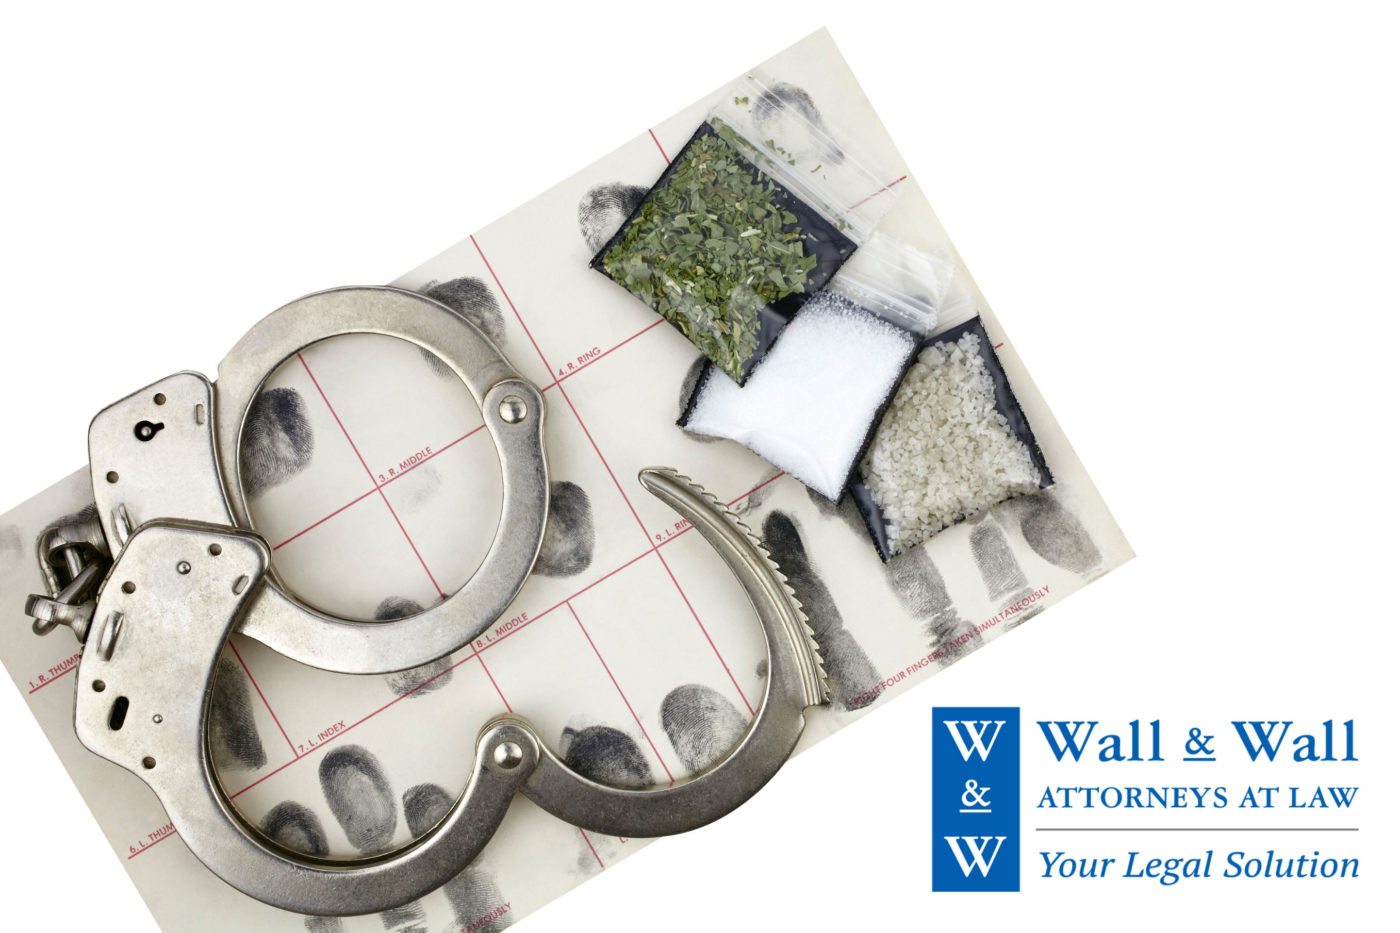 Drug possession attorney graphic - Wall and Wall Attorneys at Law